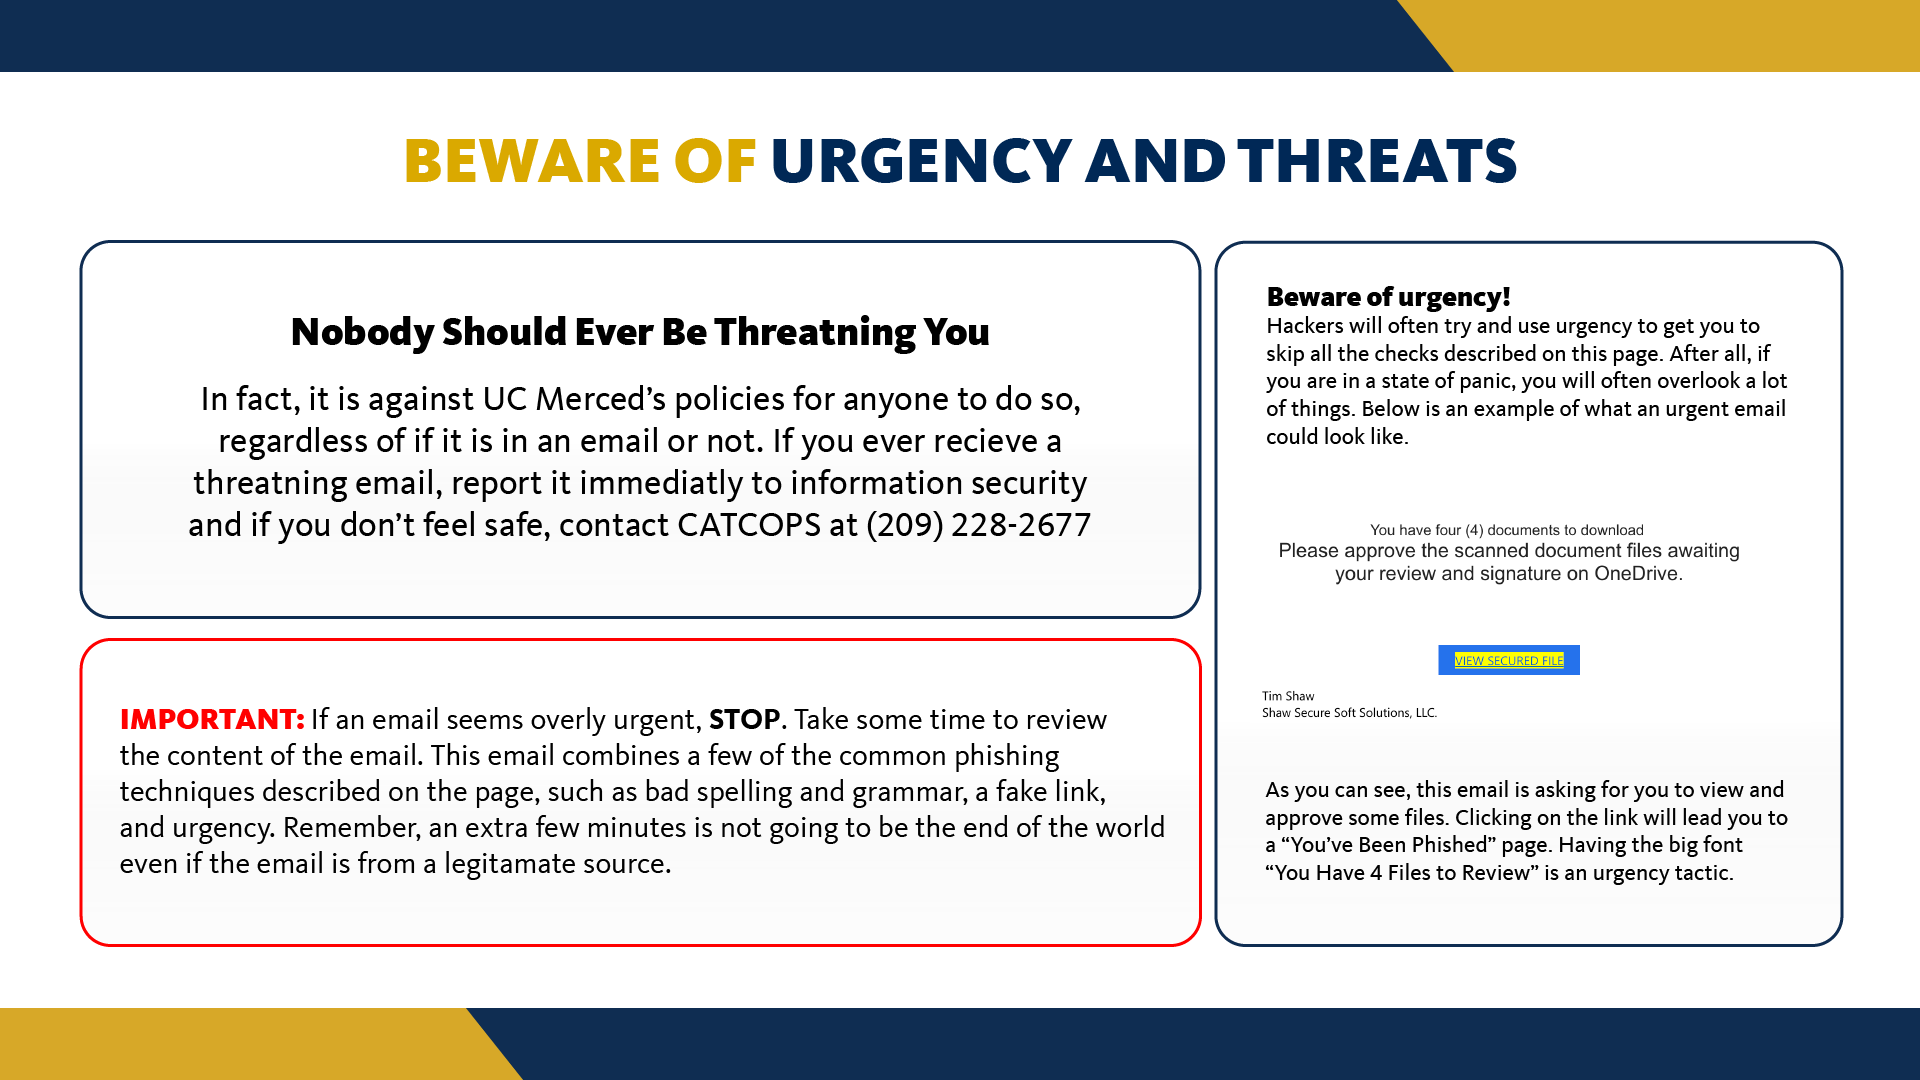 Nobody should be threatening you in an email. In fact, it is against UC Merced's policies to do so. If you ever receive an email that is threatening you, immediately report it to a trusted adult or supervisor. Hackers know that sending an email that promotes fear is a way for them to get what they want. Similarly, if an email seems overly urgent, stop and take some time to review what the email is asking of you. Hackers know that if you feel pressured you are less likely to think things through and instead opt to just do whatever the email says without stopping to think. By stopping and reviewing the email carefully, you can avoid being phished. Remember, an extra few minutes is not going to be the end of the world, even if the email is from a legitimate source.